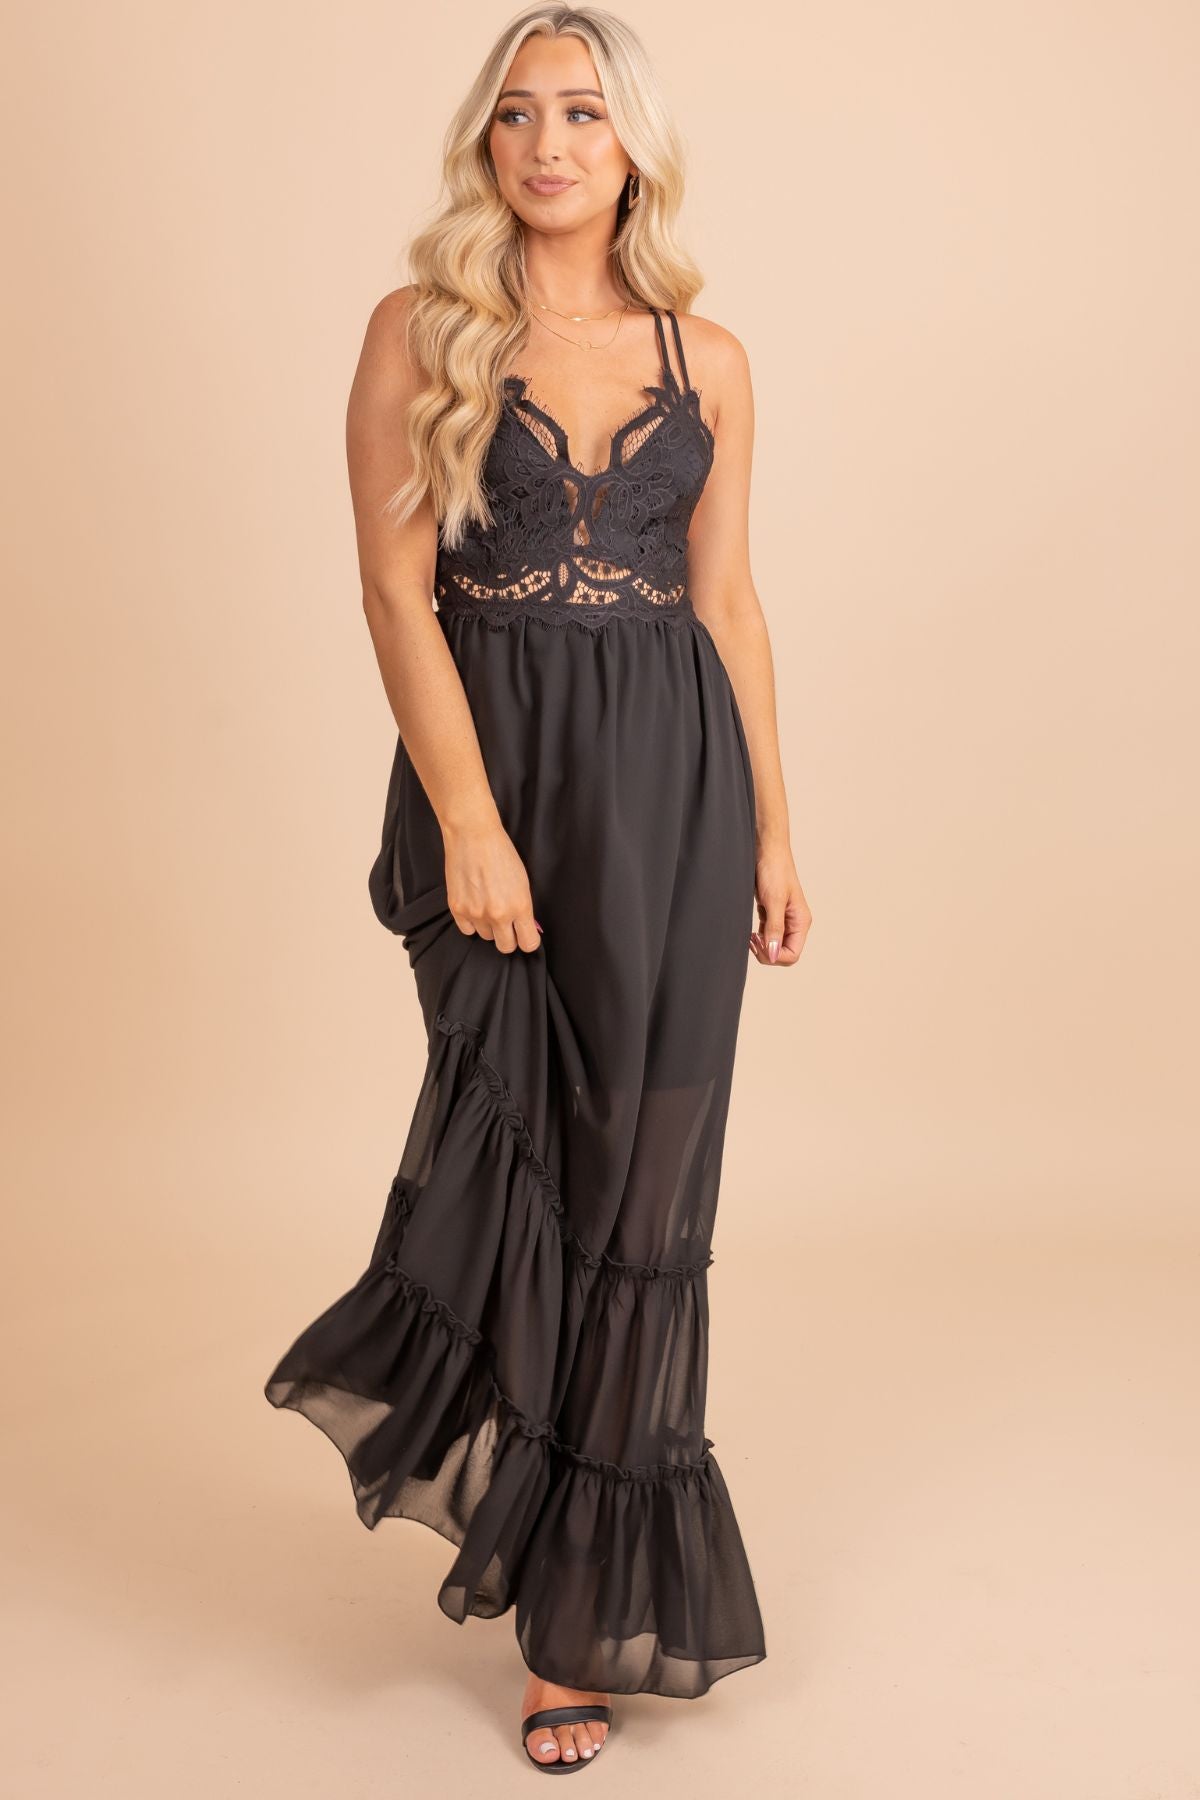 Find Your Voice Lace Strappy Maxi Dress